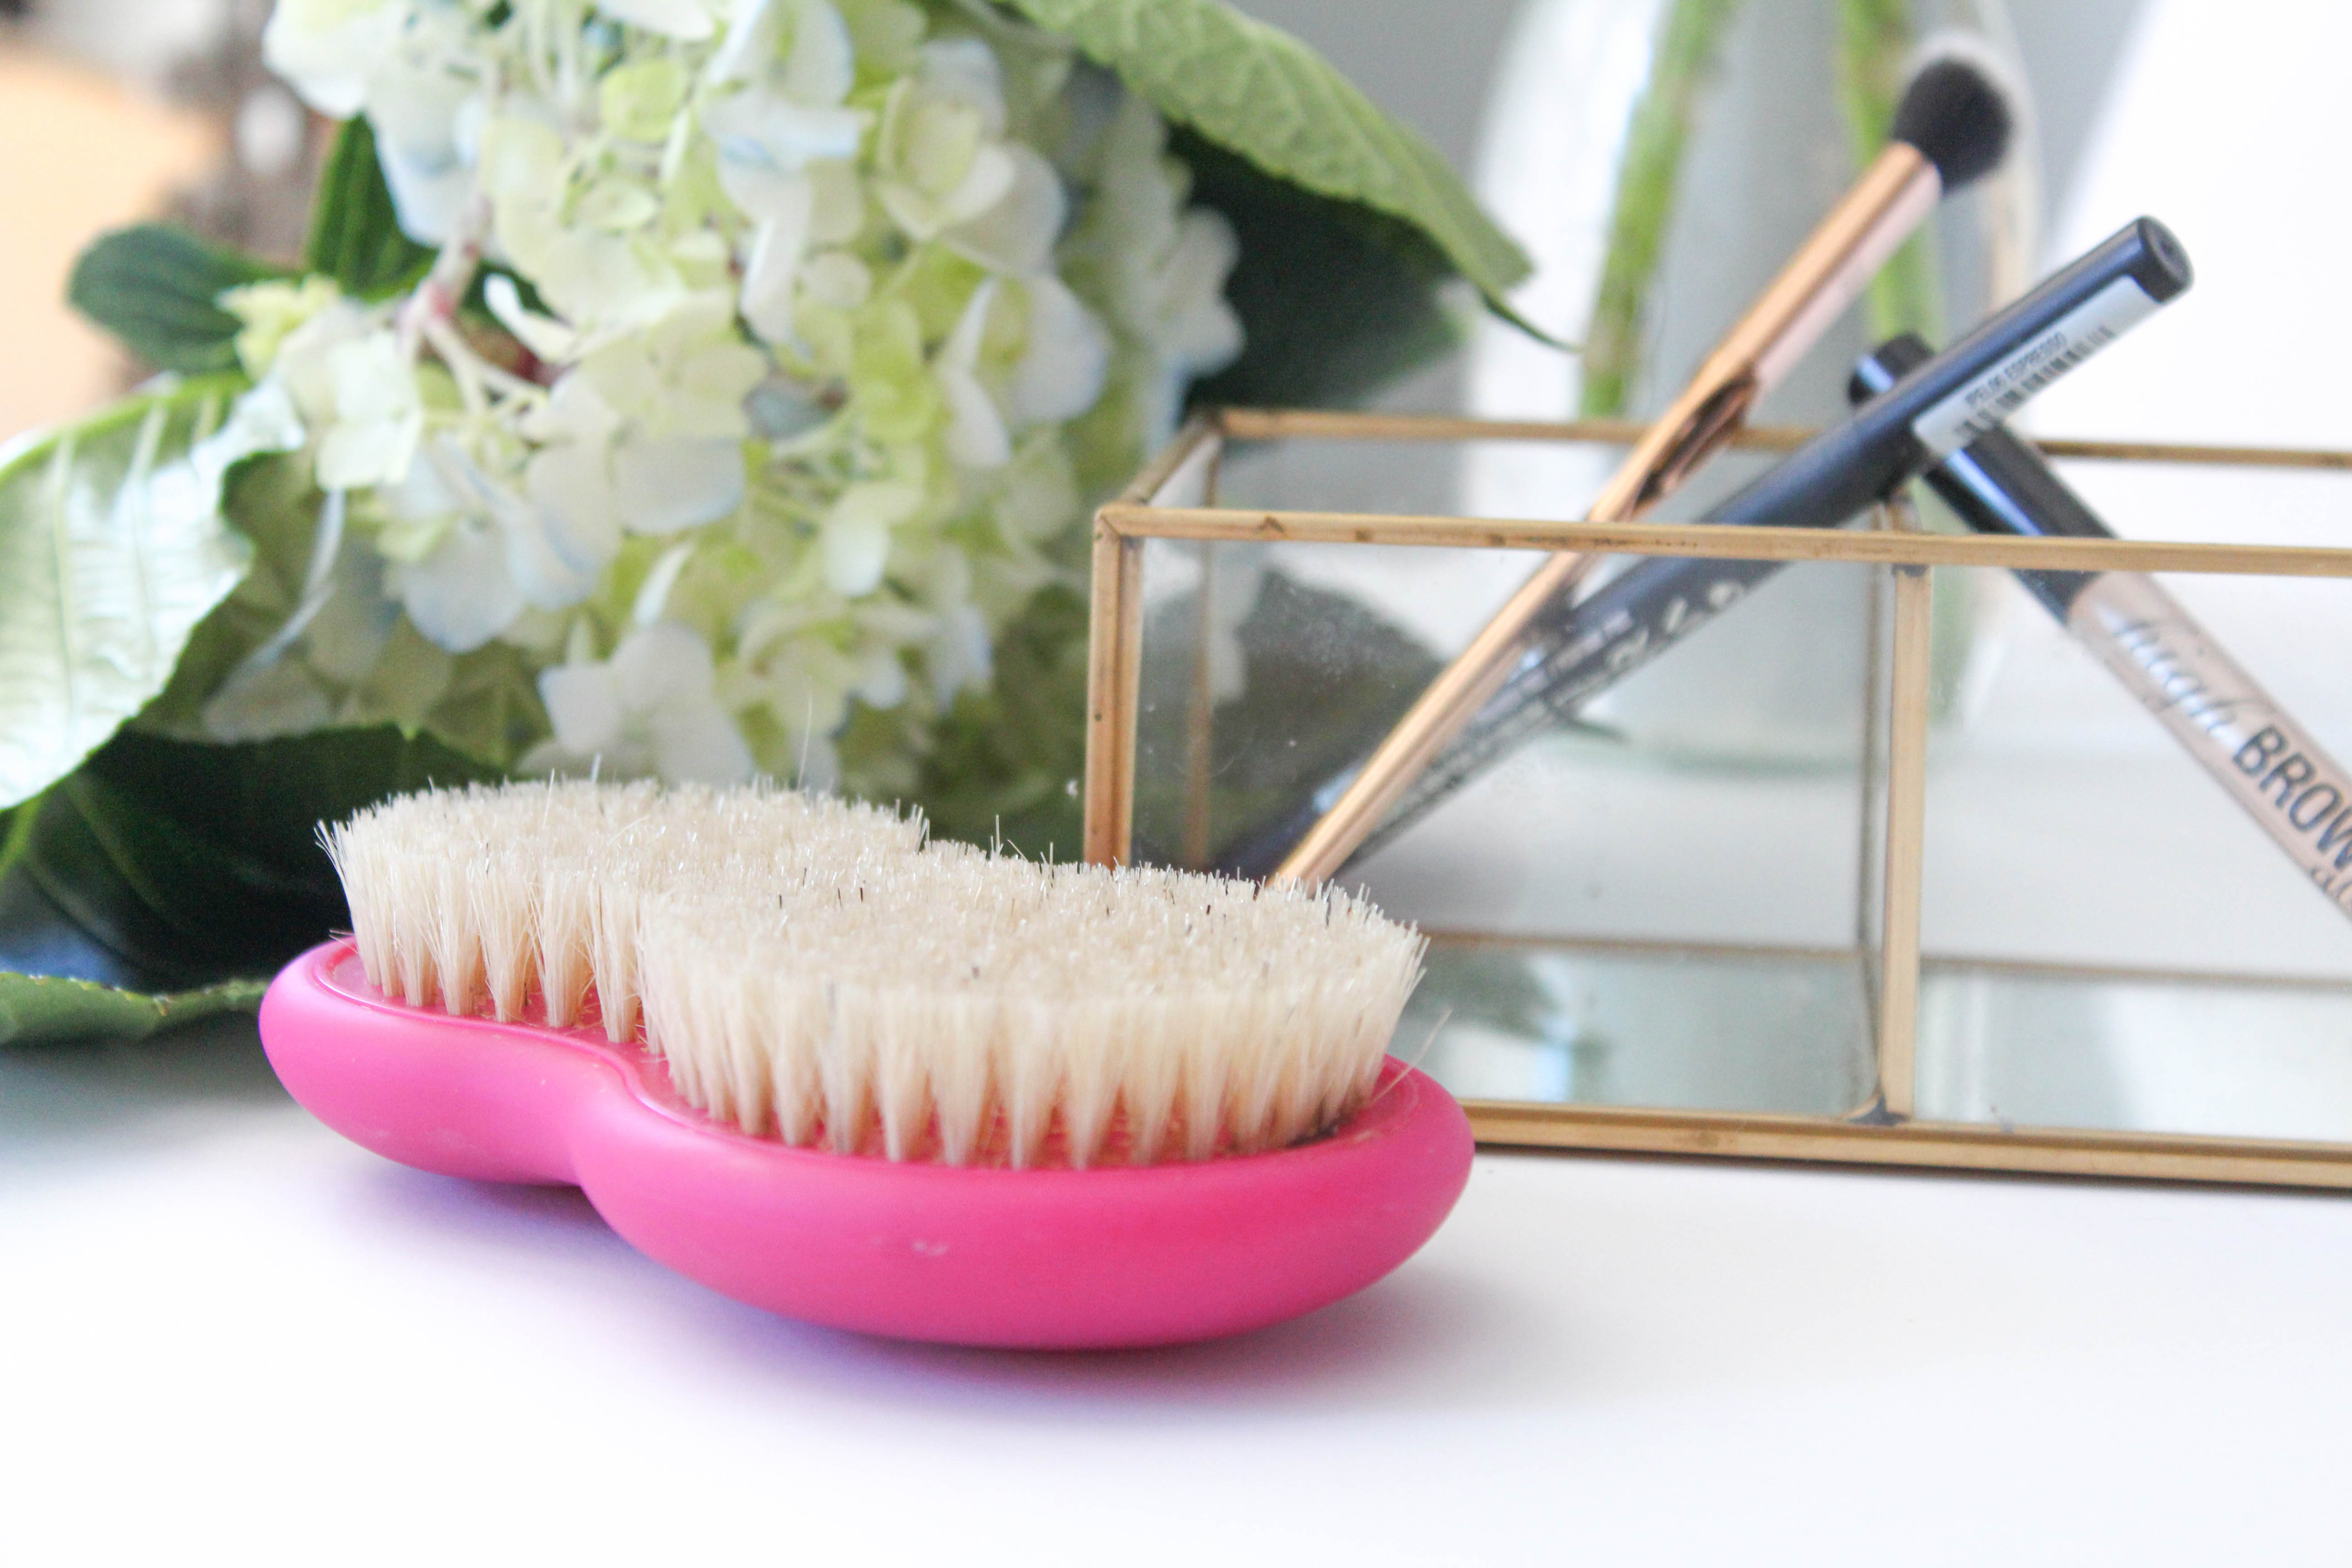 Everything you need to know about dry brushing